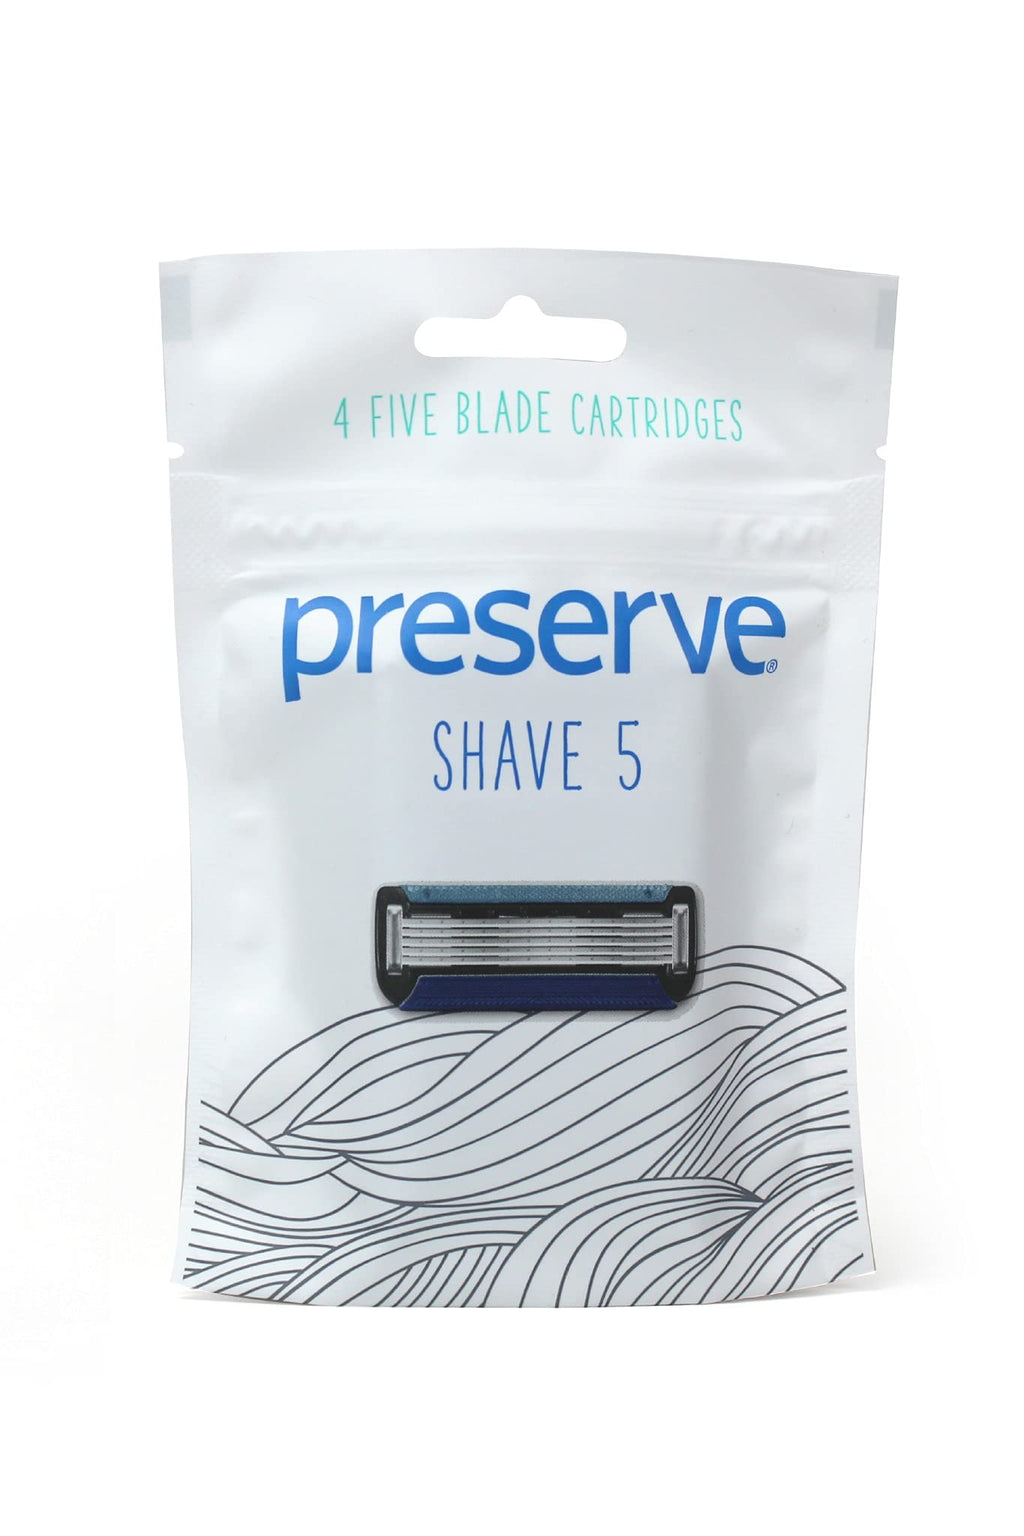 Preserve Five Blade Replacement Cartridges for Preserve Shave Five Recycled Razor, 4 Count Replacement Shave 5 Cartridges - LeoForward Australia